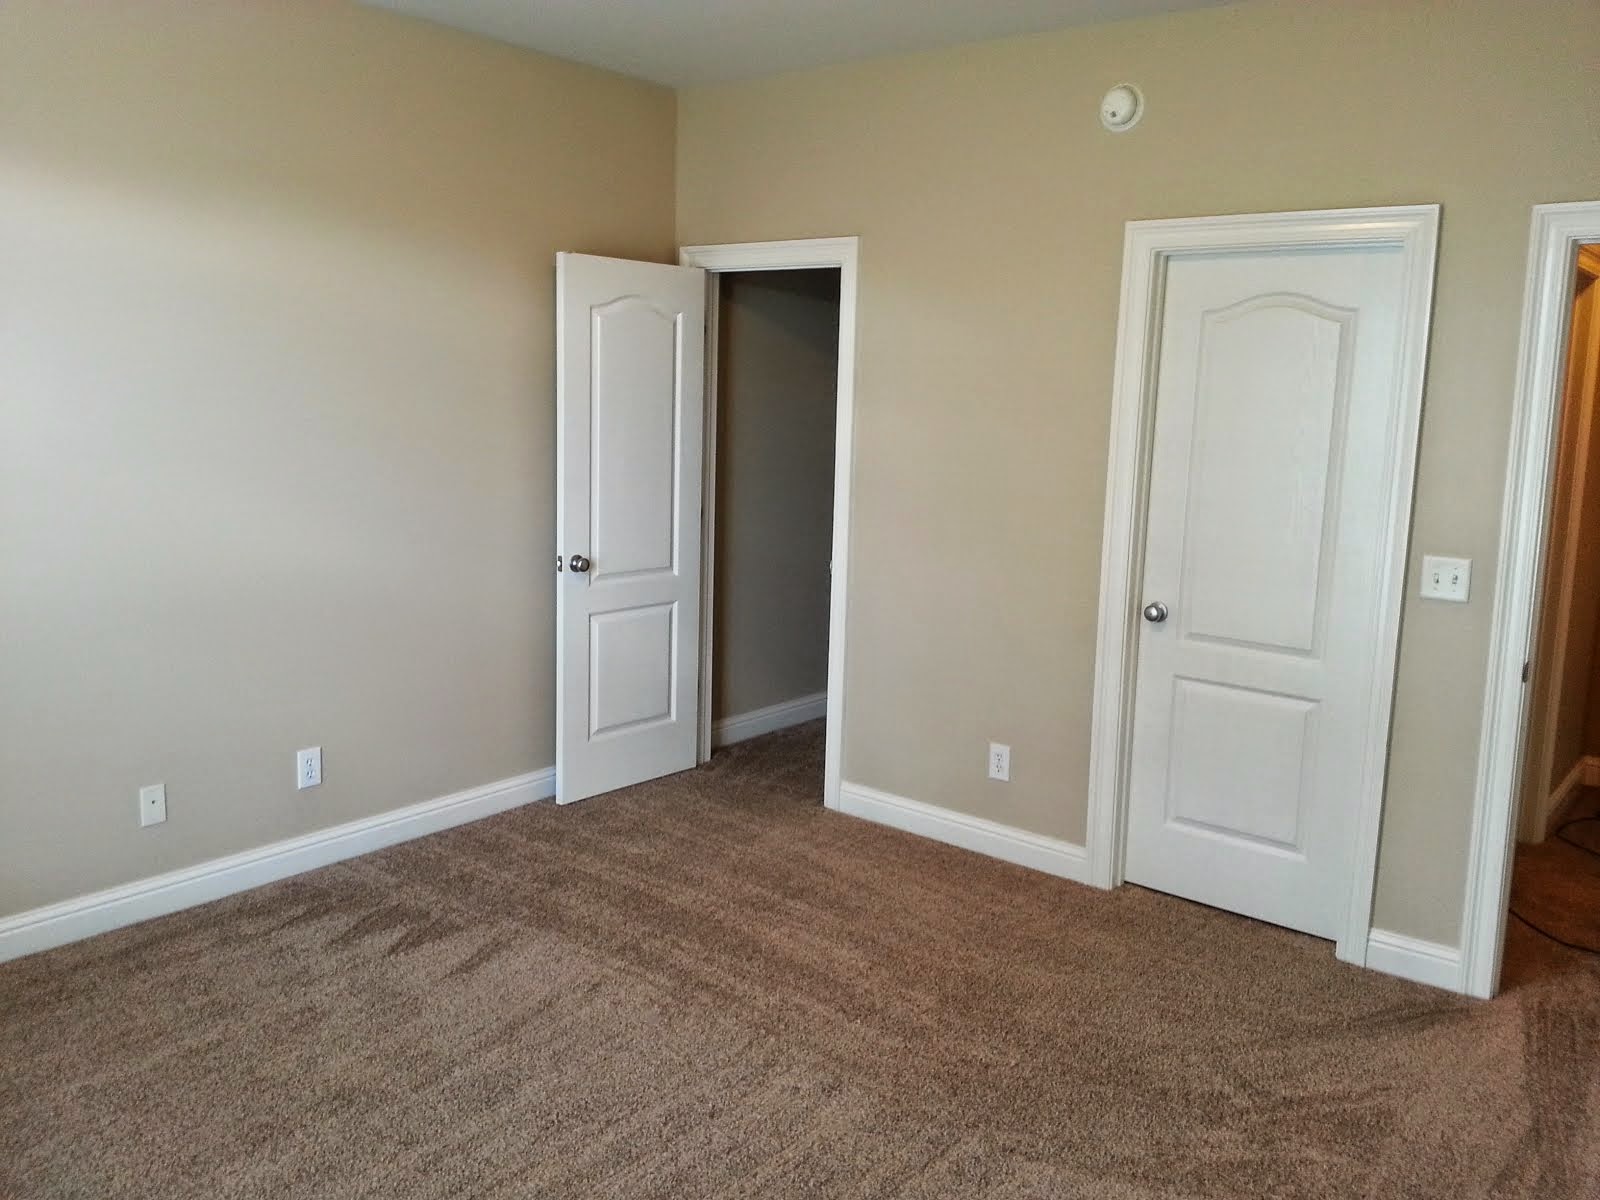 2nd Bedroom with walk-in closet to left, door to 3rd bath in middle, and hall door to right